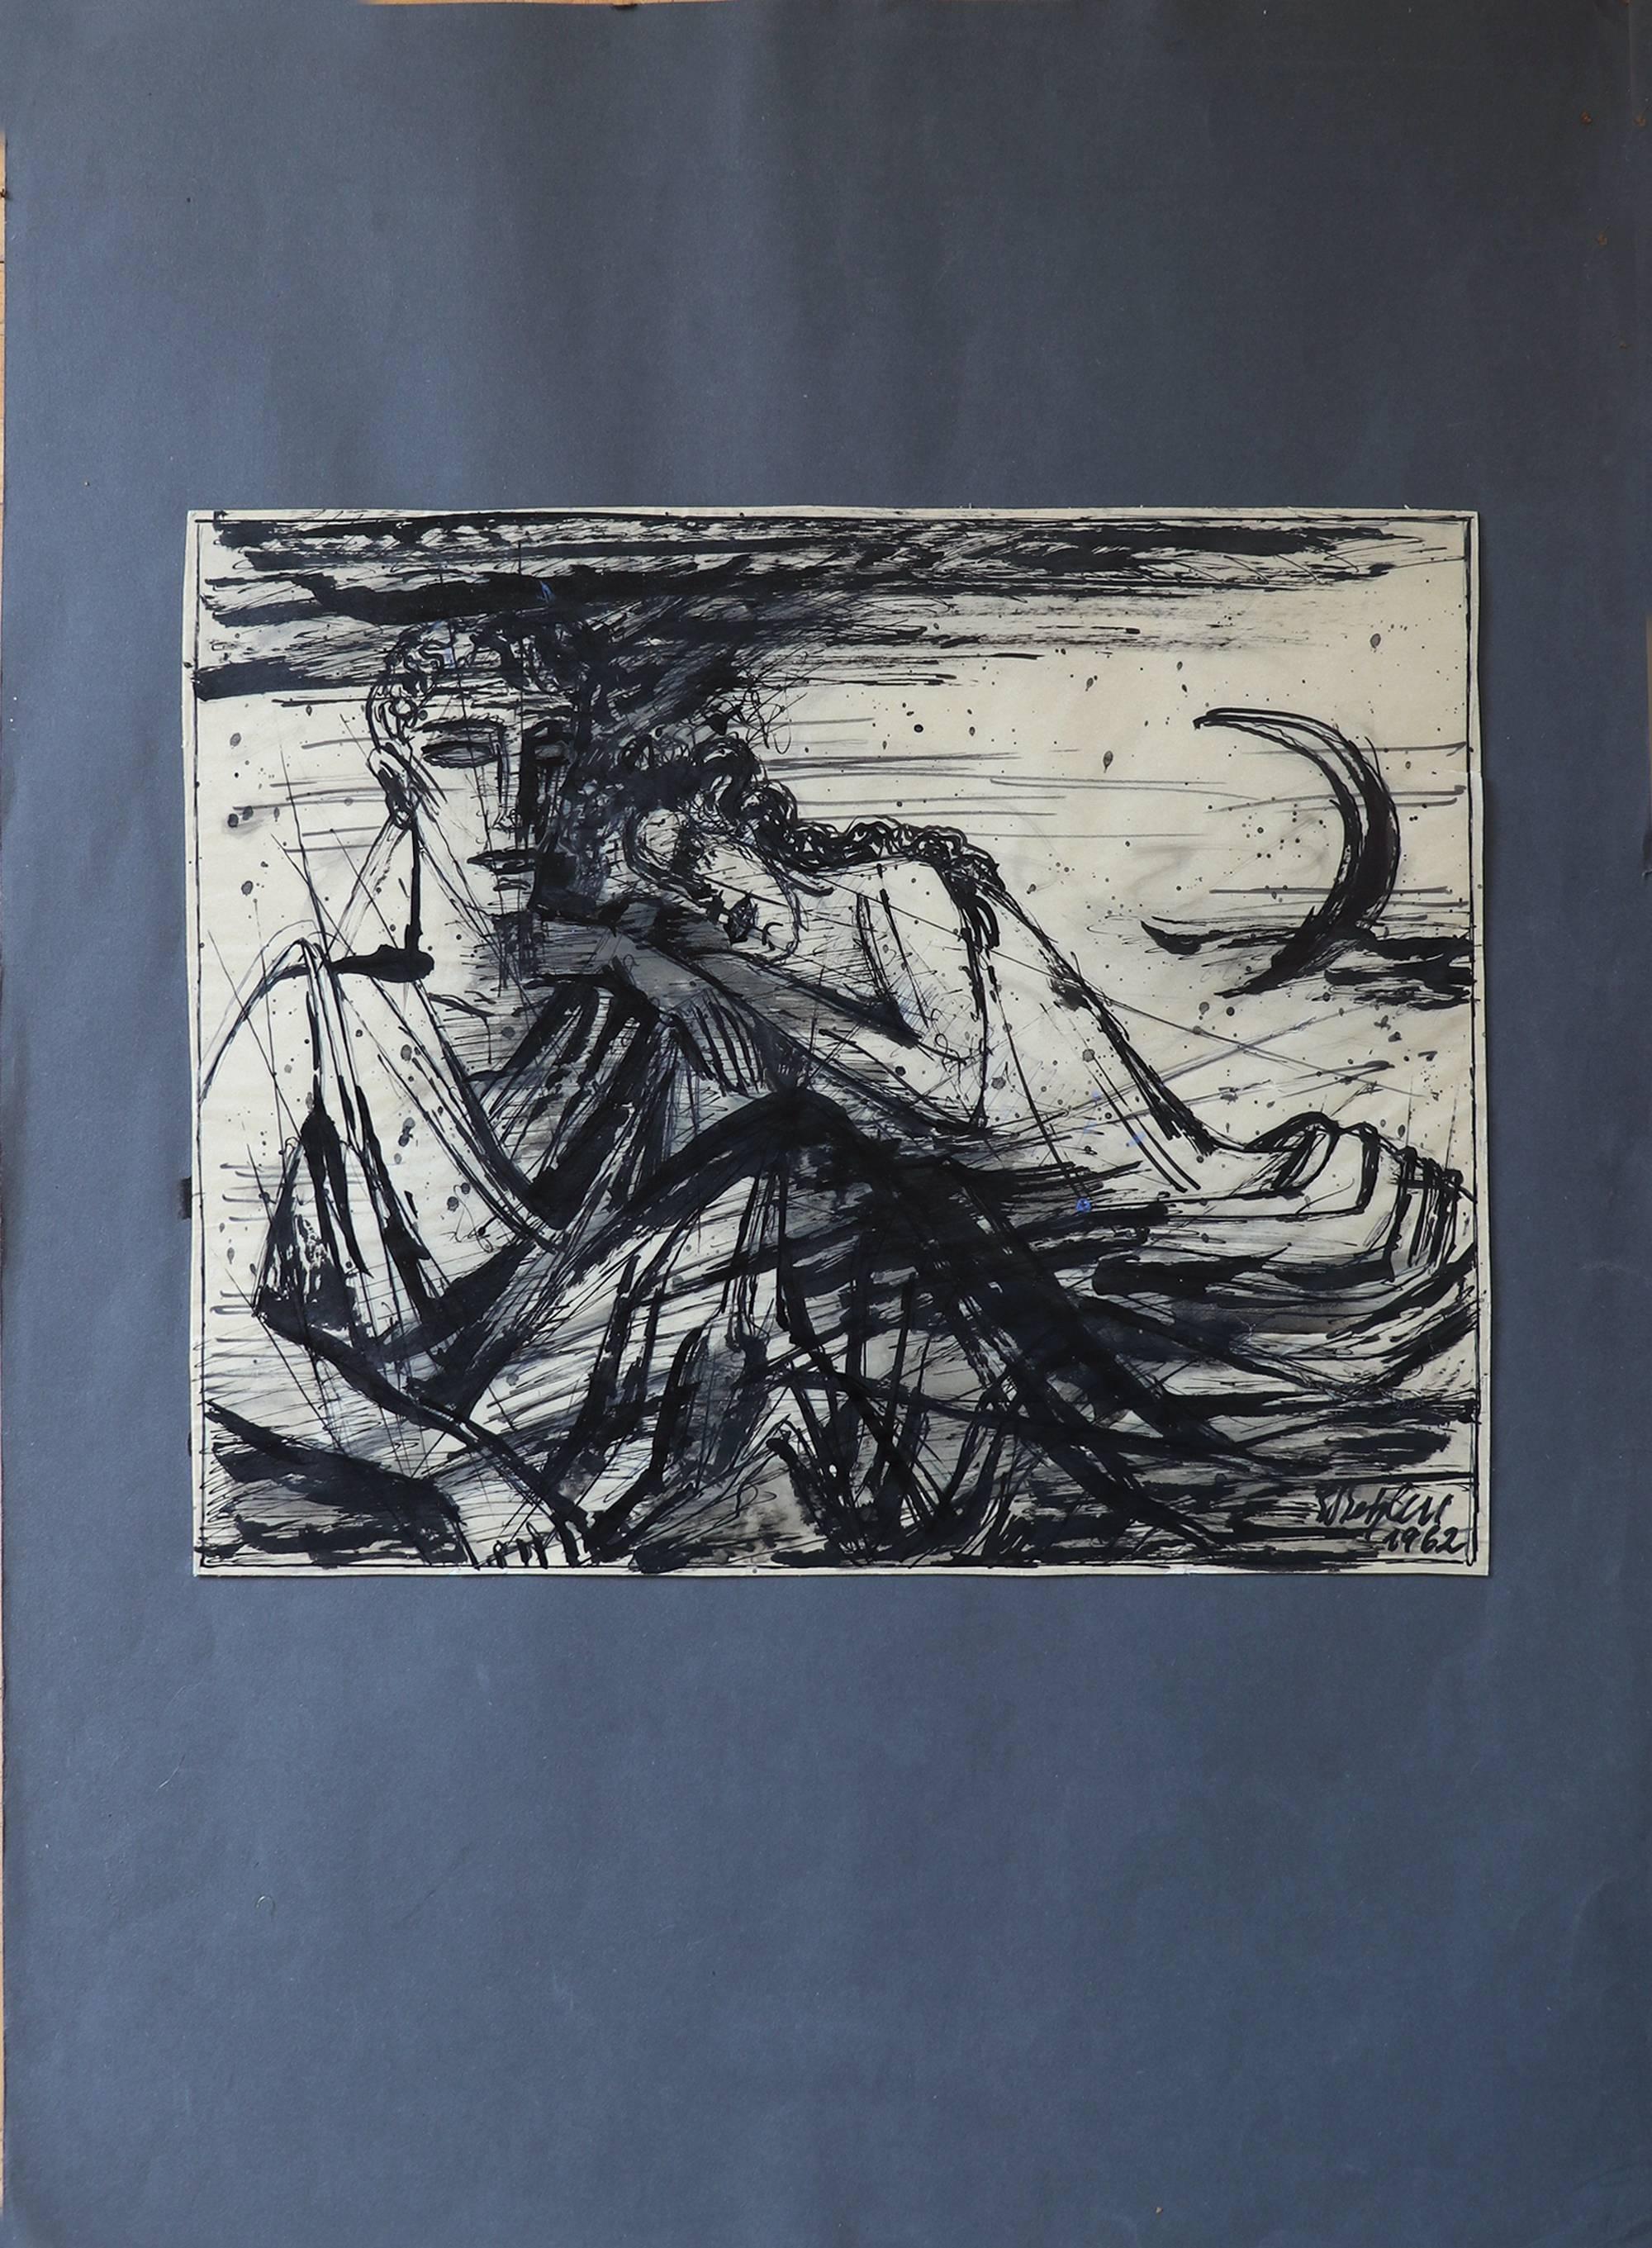 Emil Betzler 
German Expressionist painting 'Legend', 1962 ('Sage')
Pen and brush ink drawing on velin paper. 
Signed and dated by the artist.
Shown in 'Emil Betzler' - monograph of his art work released in 1968 by Prof. Dr. Hans Meyers, Metopen